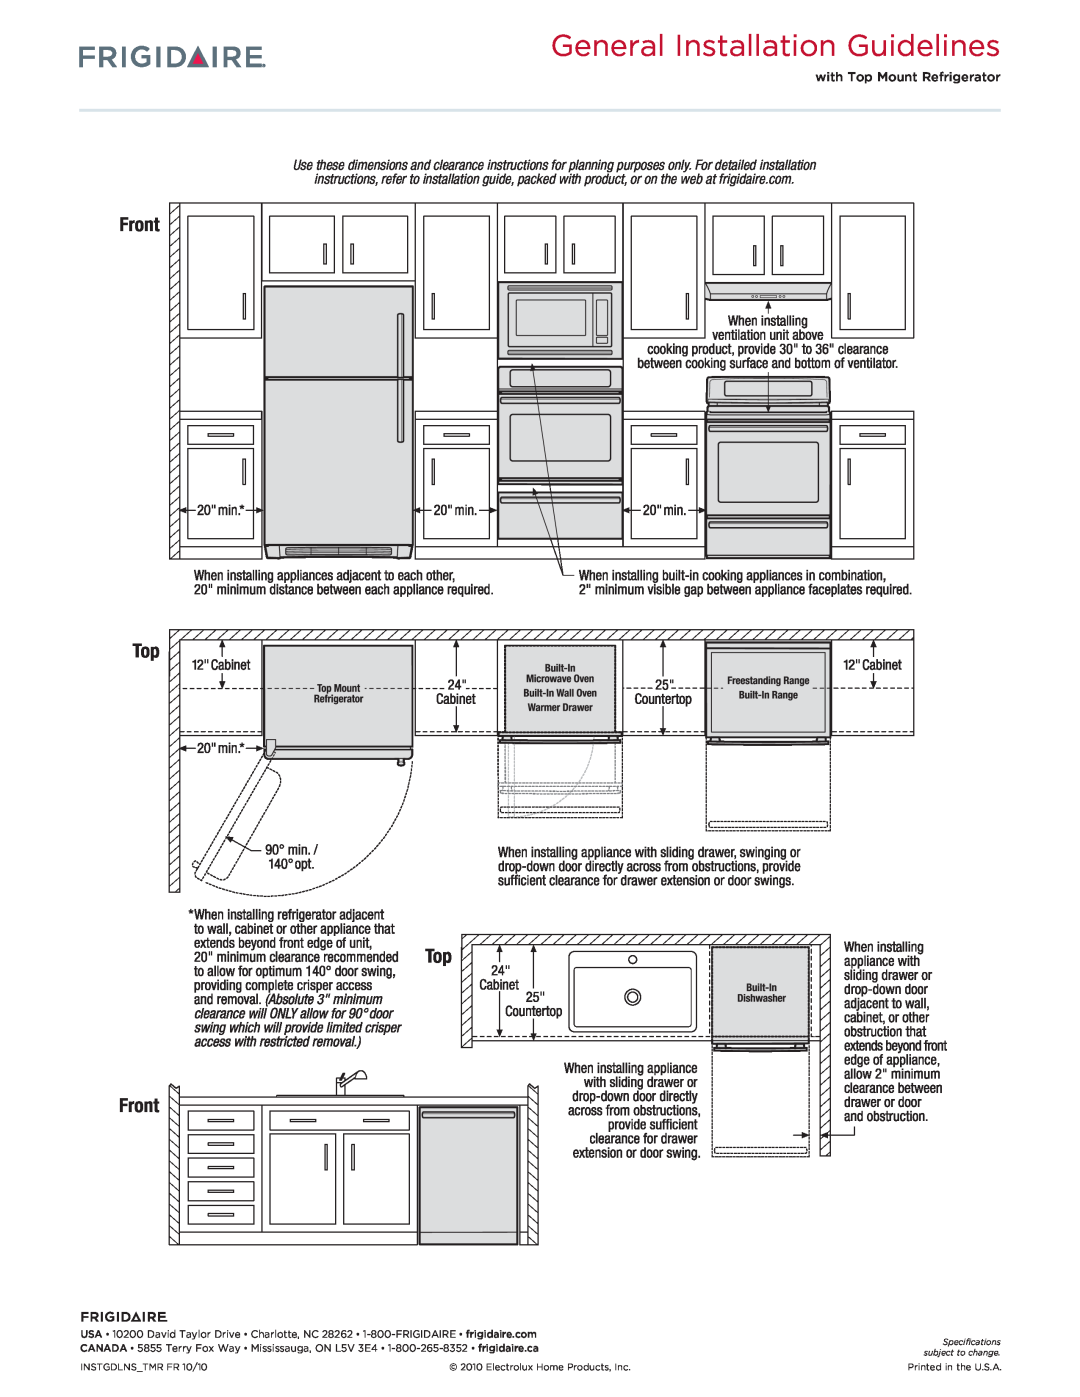 Frigidaire FGEF3031K General Installation Guidelines, Top Front, with Top Mount Refrigerator, INSTGDLNS TMR FR 10/10 